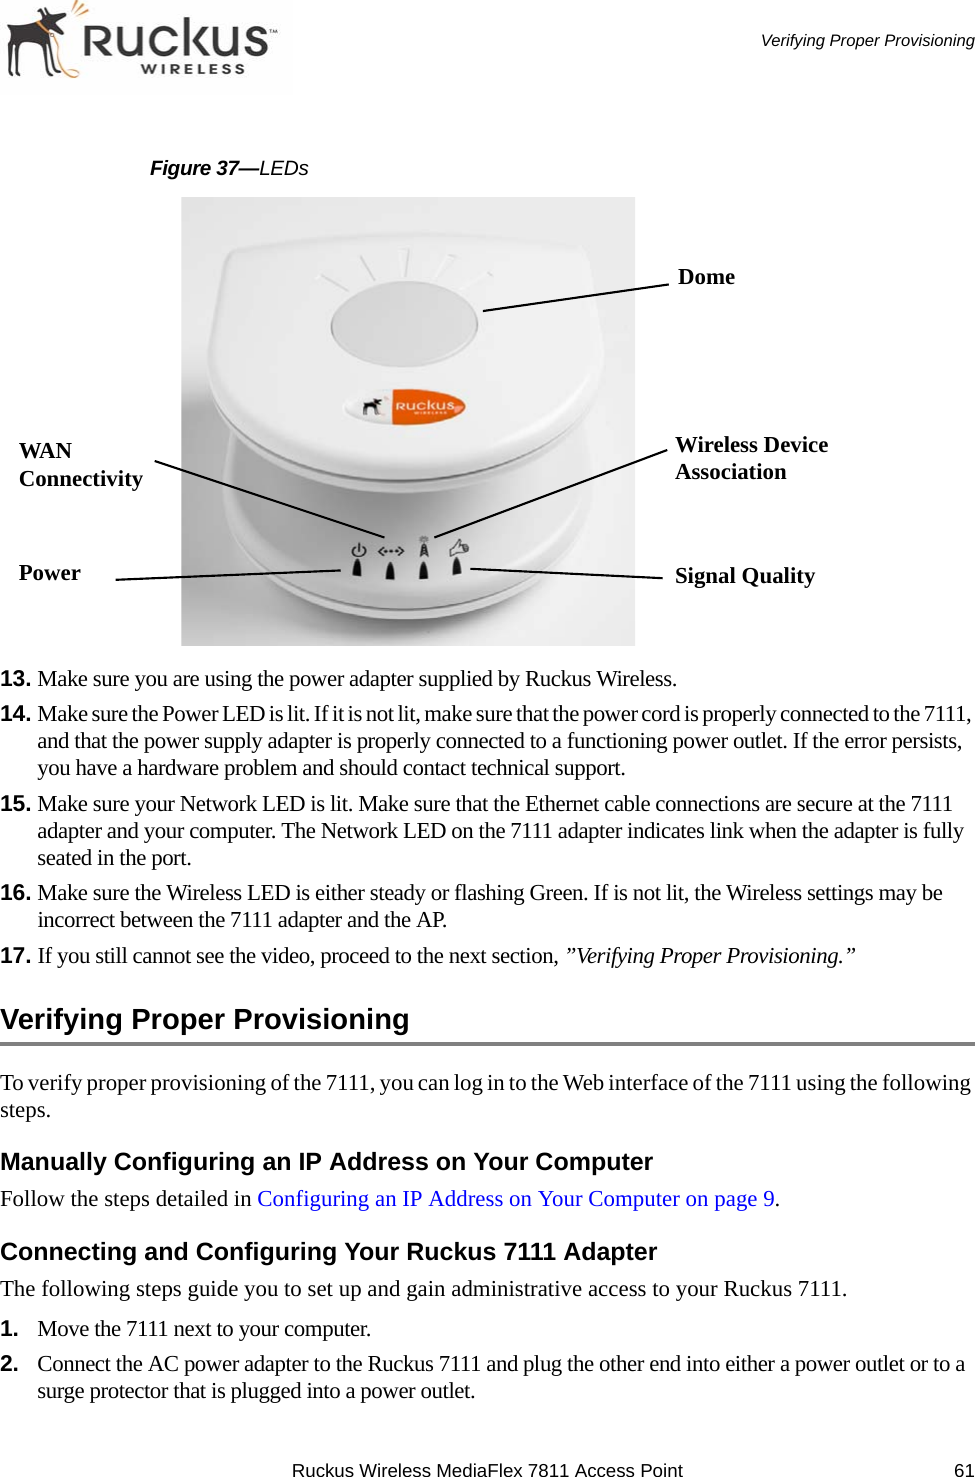 Ruckus Wireless MediaFlex 7811 Access Point 61 Verifying Proper ProvisioningFigure 37—LEDs13. Make sure you are using the power adapter supplied by Ruckus Wireless.14. Make sure the Power LED is lit. If it is not lit, make sure that the power cord is properly connected to the 7111, and that the power supply adapter is properly connected to a functioning power outlet. If the error persists, you have a hardware problem and should contact technical support.15. Make sure your Network LED is lit. Make sure that the Ethernet cable connections are secure at the 7111 adapter and your computer. The Network LED on the 7111 adapter indicates link when the adapter is fully seated in the port.16. Make sure the Wireless LED is either steady or flashing Green. If is not lit, the Wireless settings may be incorrect between the 7111 adapter and the AP.17. If you still cannot see the video, proceed to the next section, ”Verifying Proper Provisioning.”Verifying Proper ProvisioningTo verify proper provisioning of the 7111, you can log in to the Web interface of the 7111 using the following steps.Manually Configuring an IP Address on Your ComputerFollow the steps detailed in Configuring an IP Address on Your Computer on page 9.Connecting and Configuring Your Ruckus 7111 AdapterThe following steps guide you to set up and gain administrative access to your Ruckus 7111.1. Move the 7111 next to your computer.2. Connect the AC power adapter to the Ruckus 7111 and plug the other end into either a power outlet or to a surge protector that is plugged into a power outlet.DomeSignal QualityWireless Device AssociationPowerWAN Connectivity